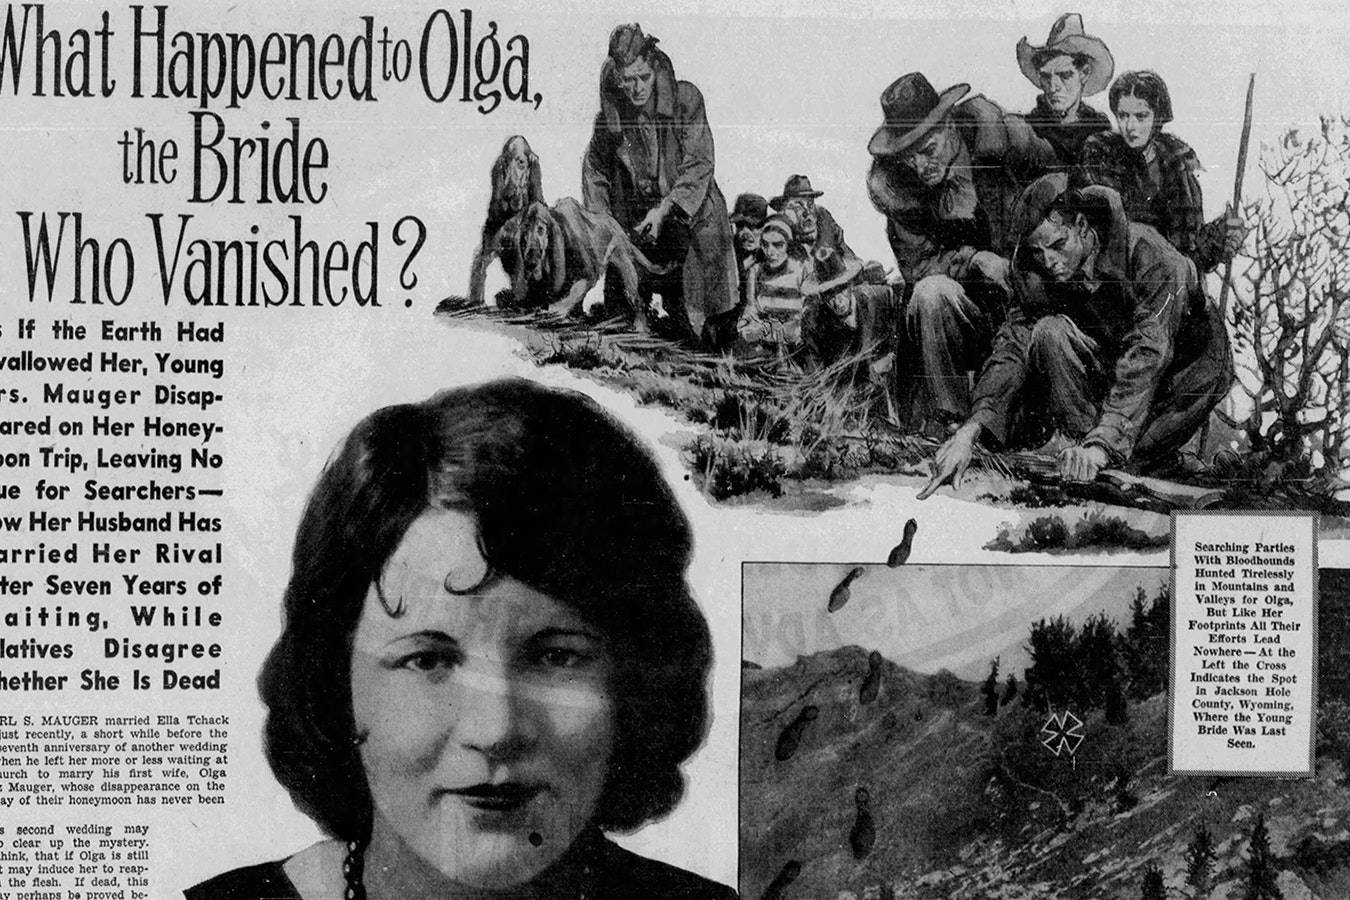 It's been nearly 90 years since Olga Mauger disappeared while on a Wyoming hunting honeymoon. There are no more clues to what happened to her today than in 1934, making her vanishing Wyoming's oldest and coldest missing person's case